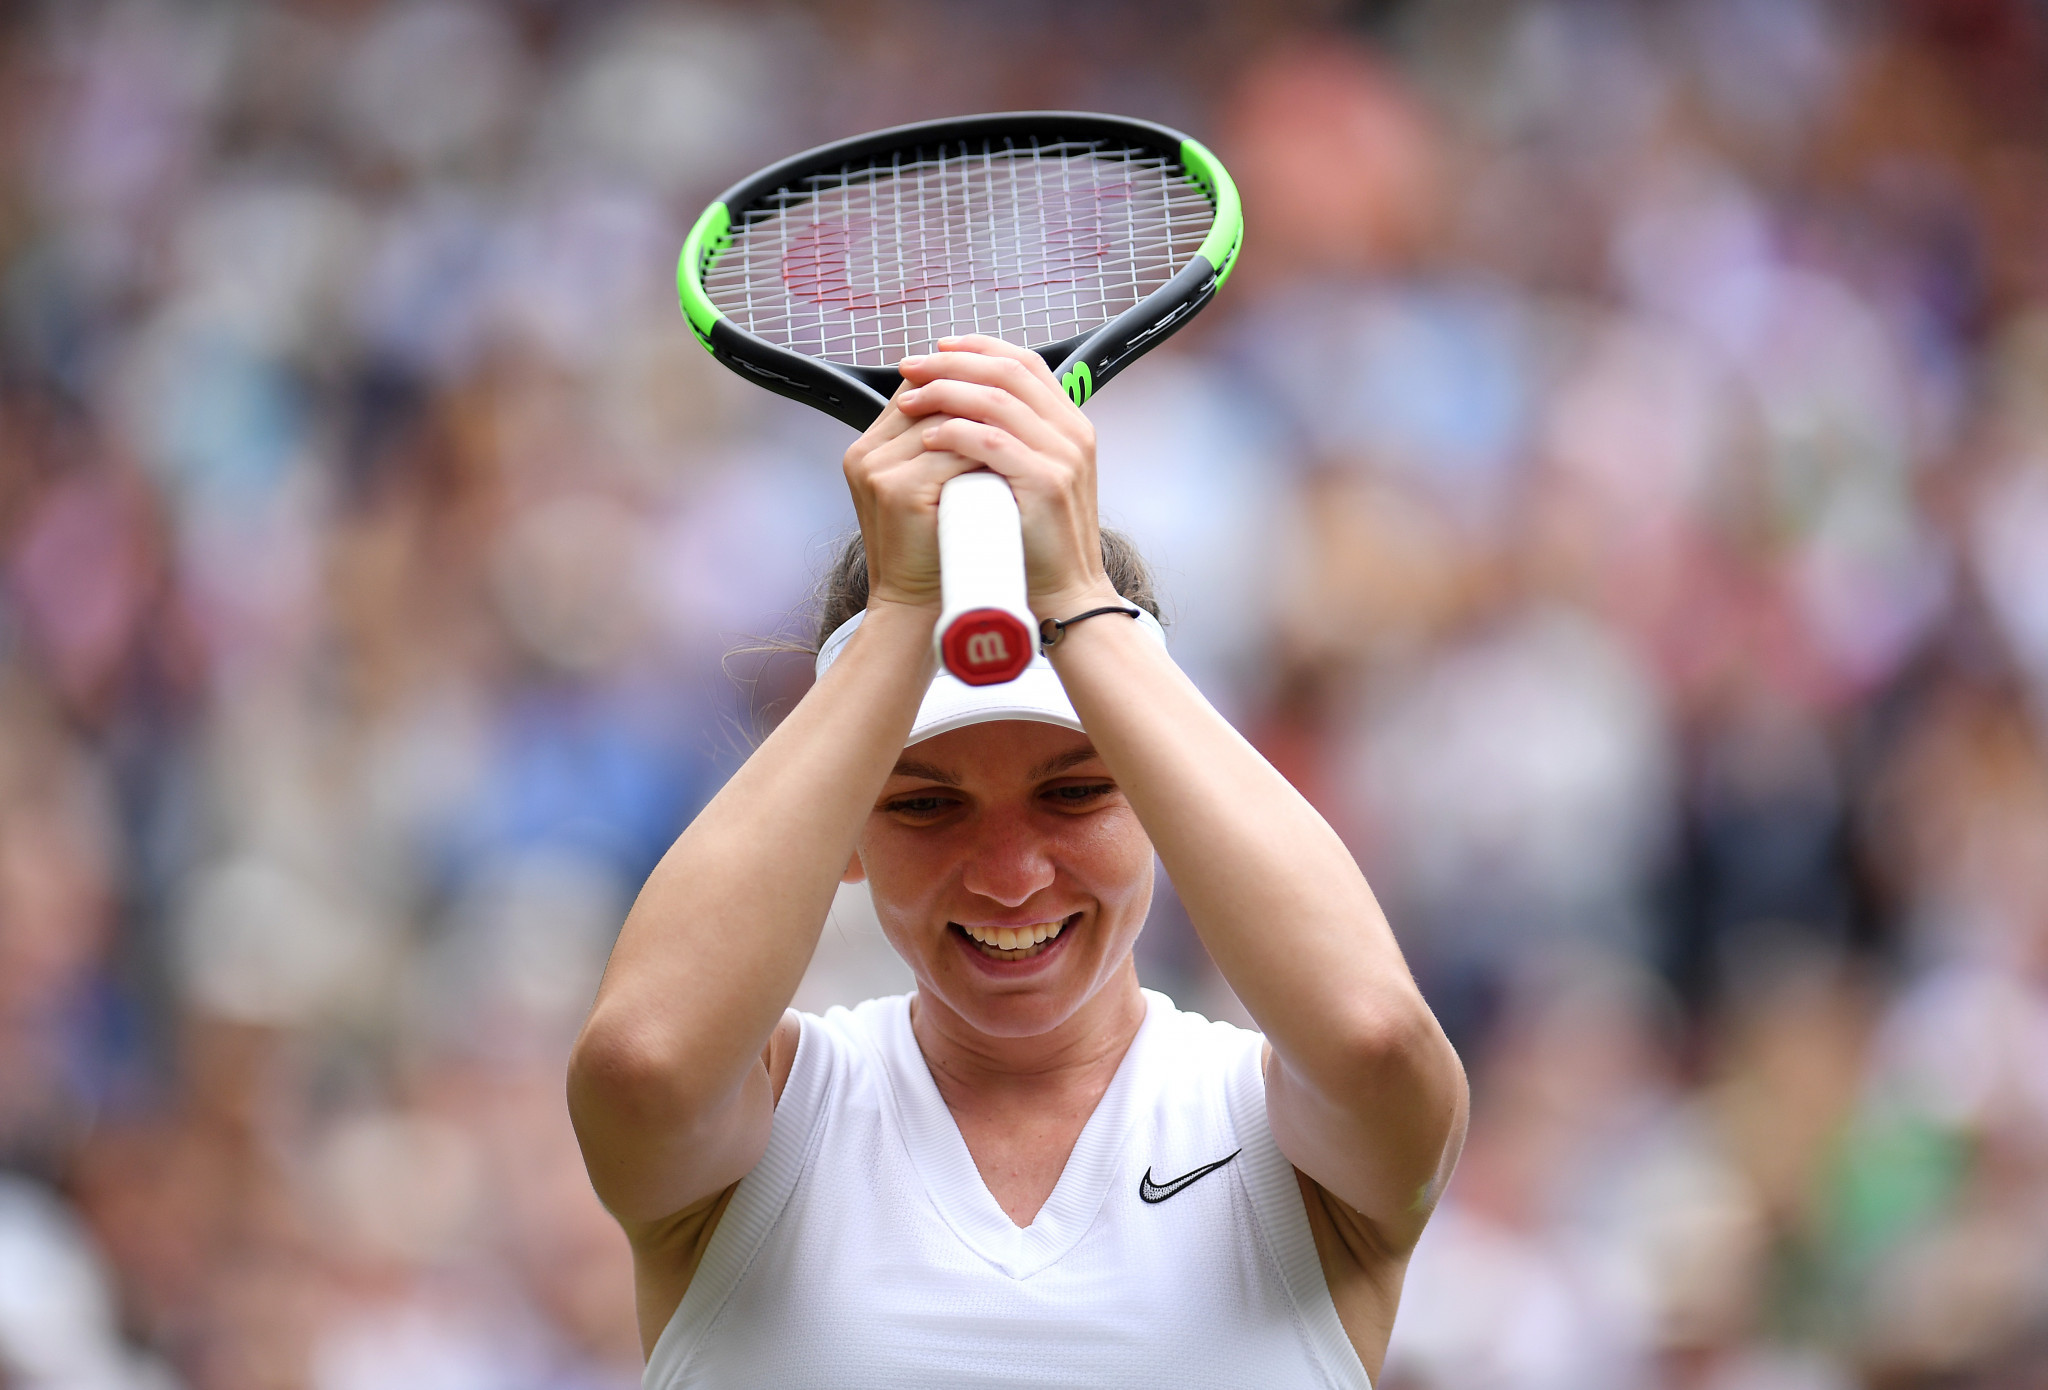 Halep could not contain her delight at a second Grand Slam crown ©Getty Images